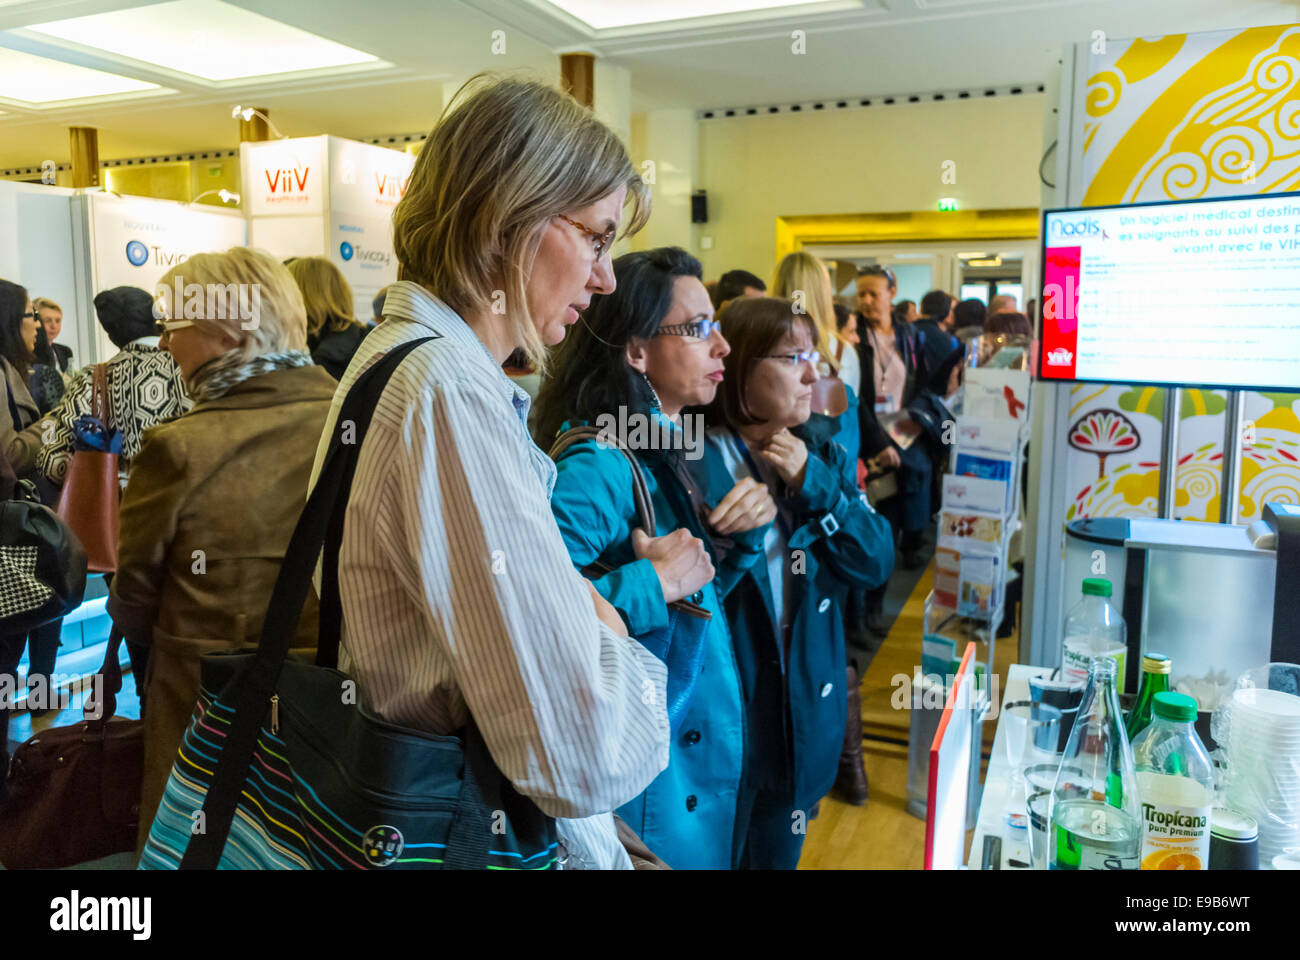 Paris, France. Trade Show, 15th Congress of SFLS, French Society in FIght against AIDS, N.G.O's, and Drug Companies. Women looking at VIIIV Pharmaceuticals Company Stall, pharma industry Stock Photo